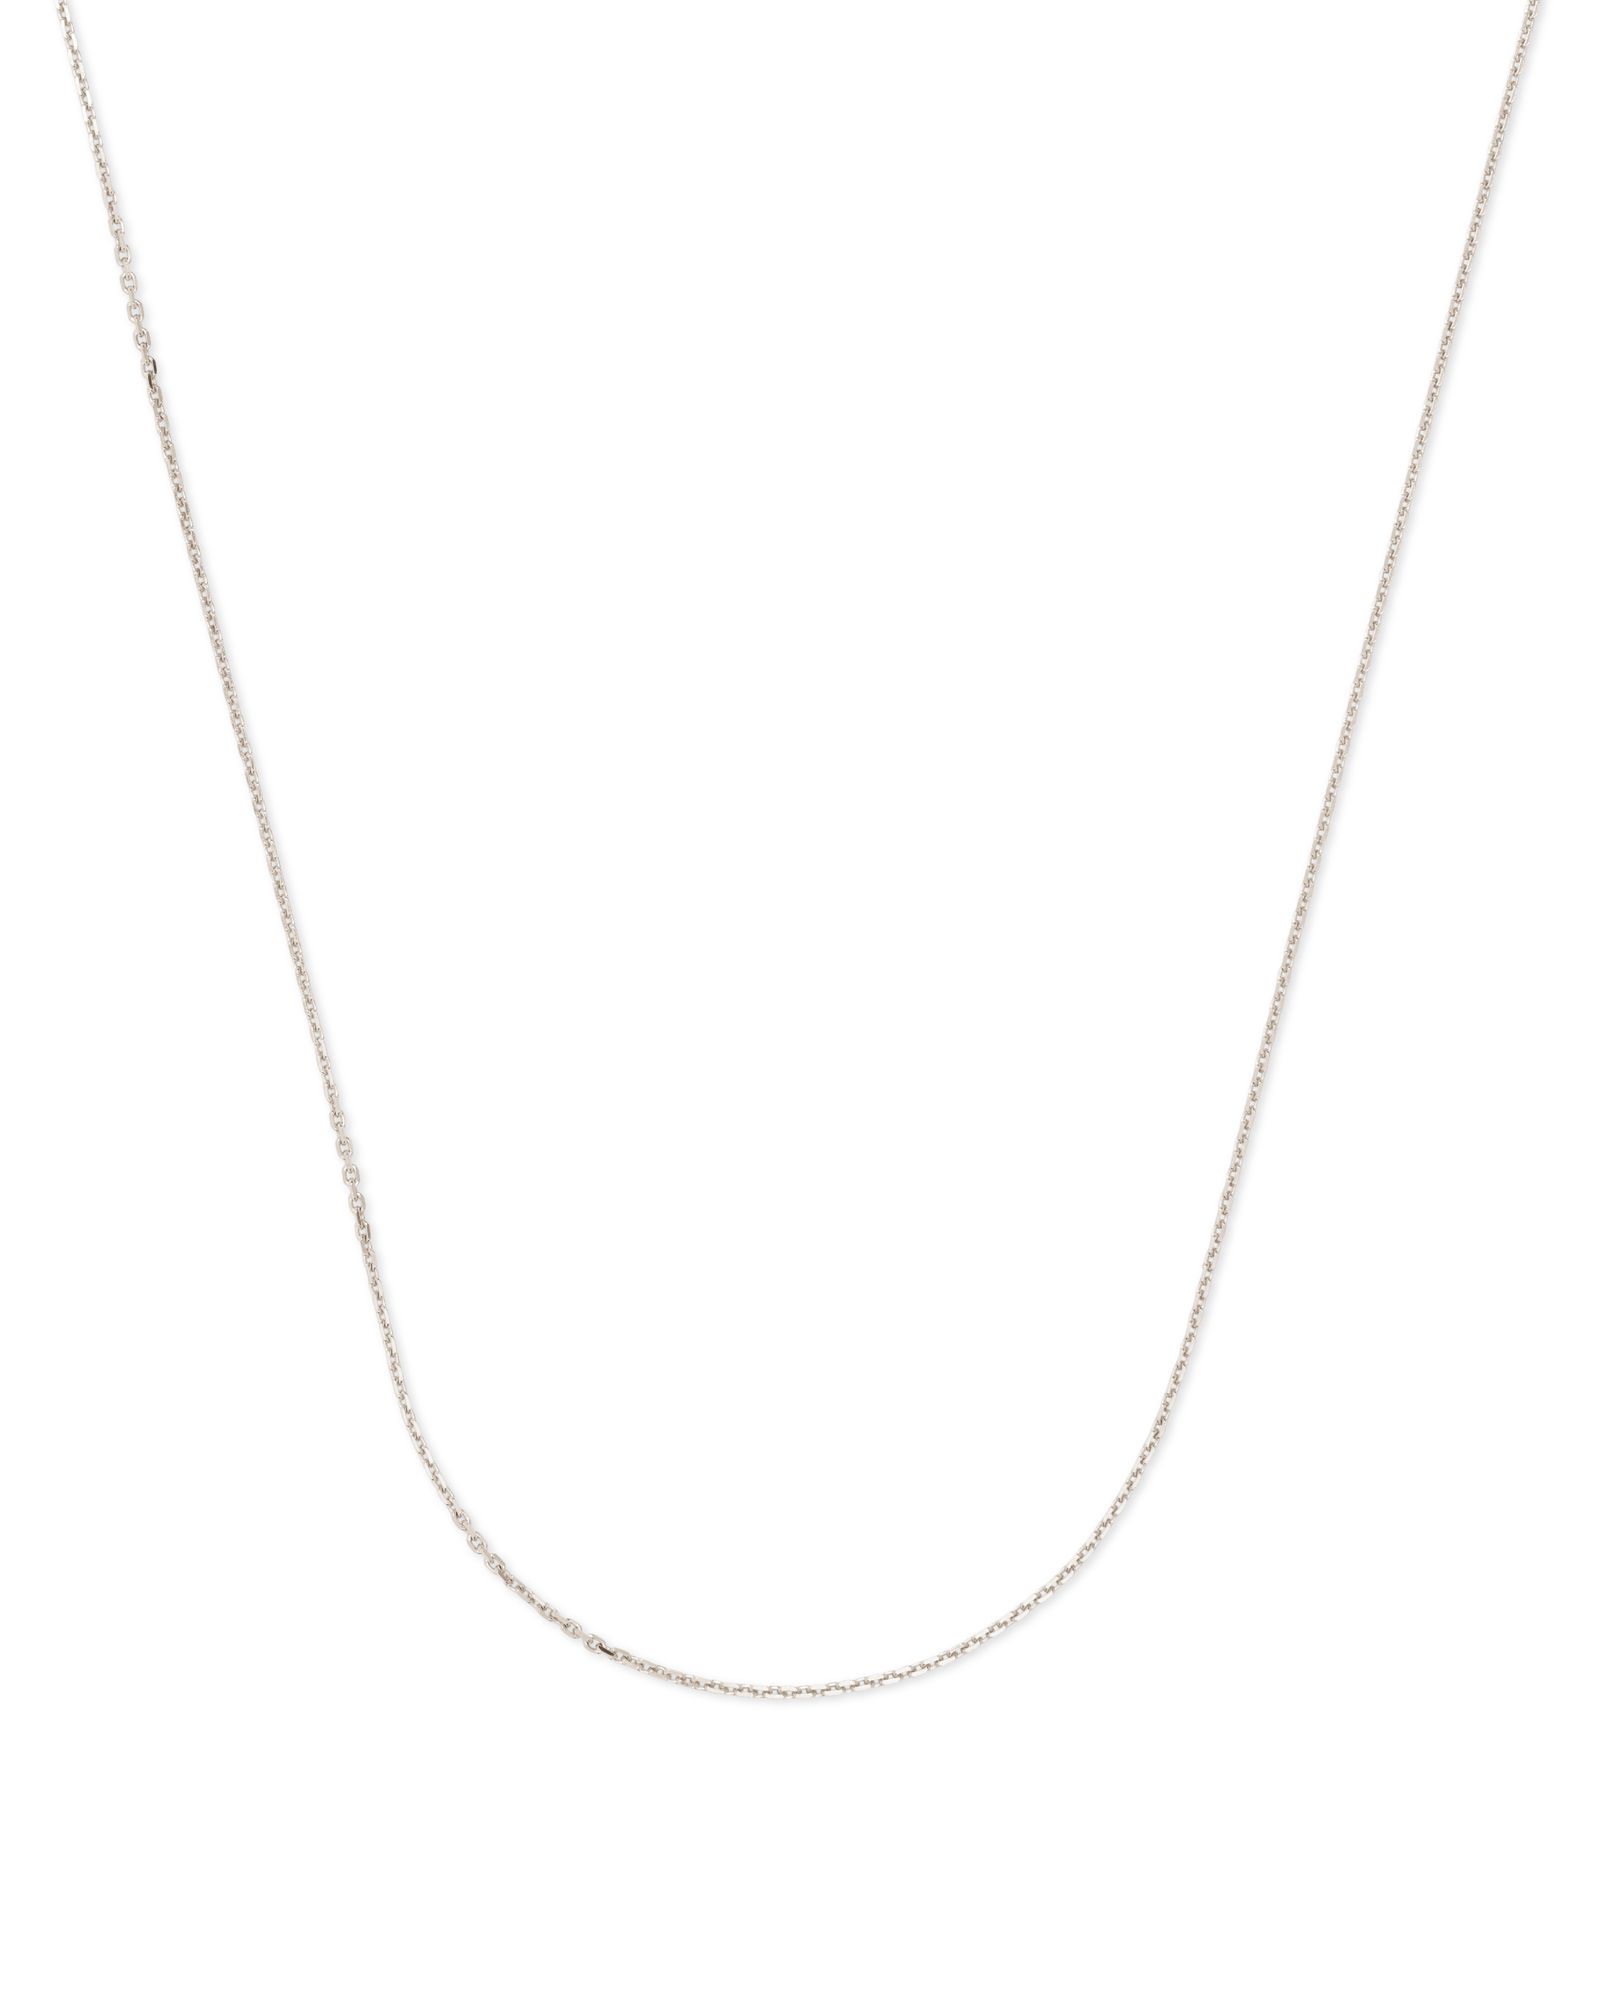 Men's Silver Chain Necklace | 4mm Width | 16 inch - 18 inch - 20 inch - 22 inch - 24 inch | 40cm - 60cm | CubanSkinny | Thin Chain | Mens Gift Idea